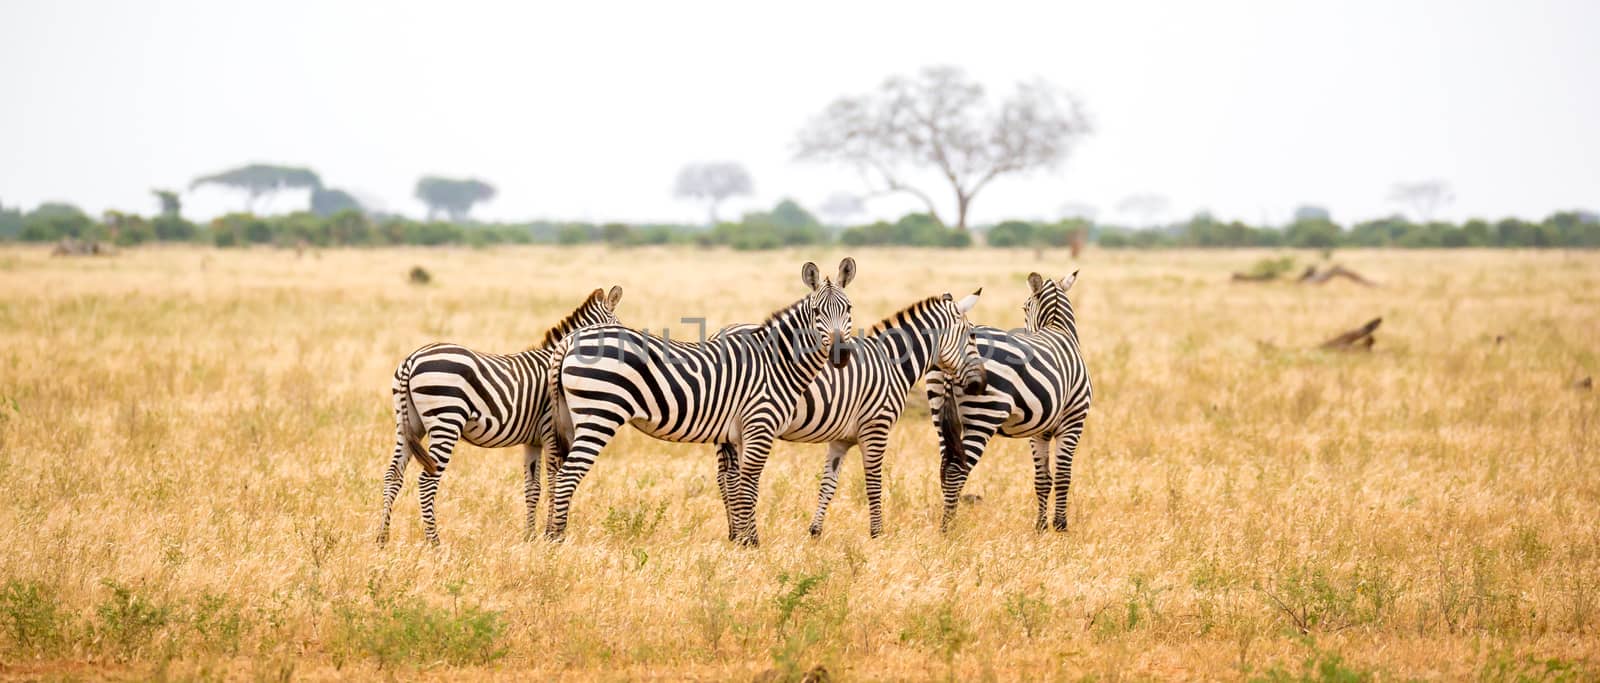 A zebra standing or walking throught the grassland by 25ehaag6